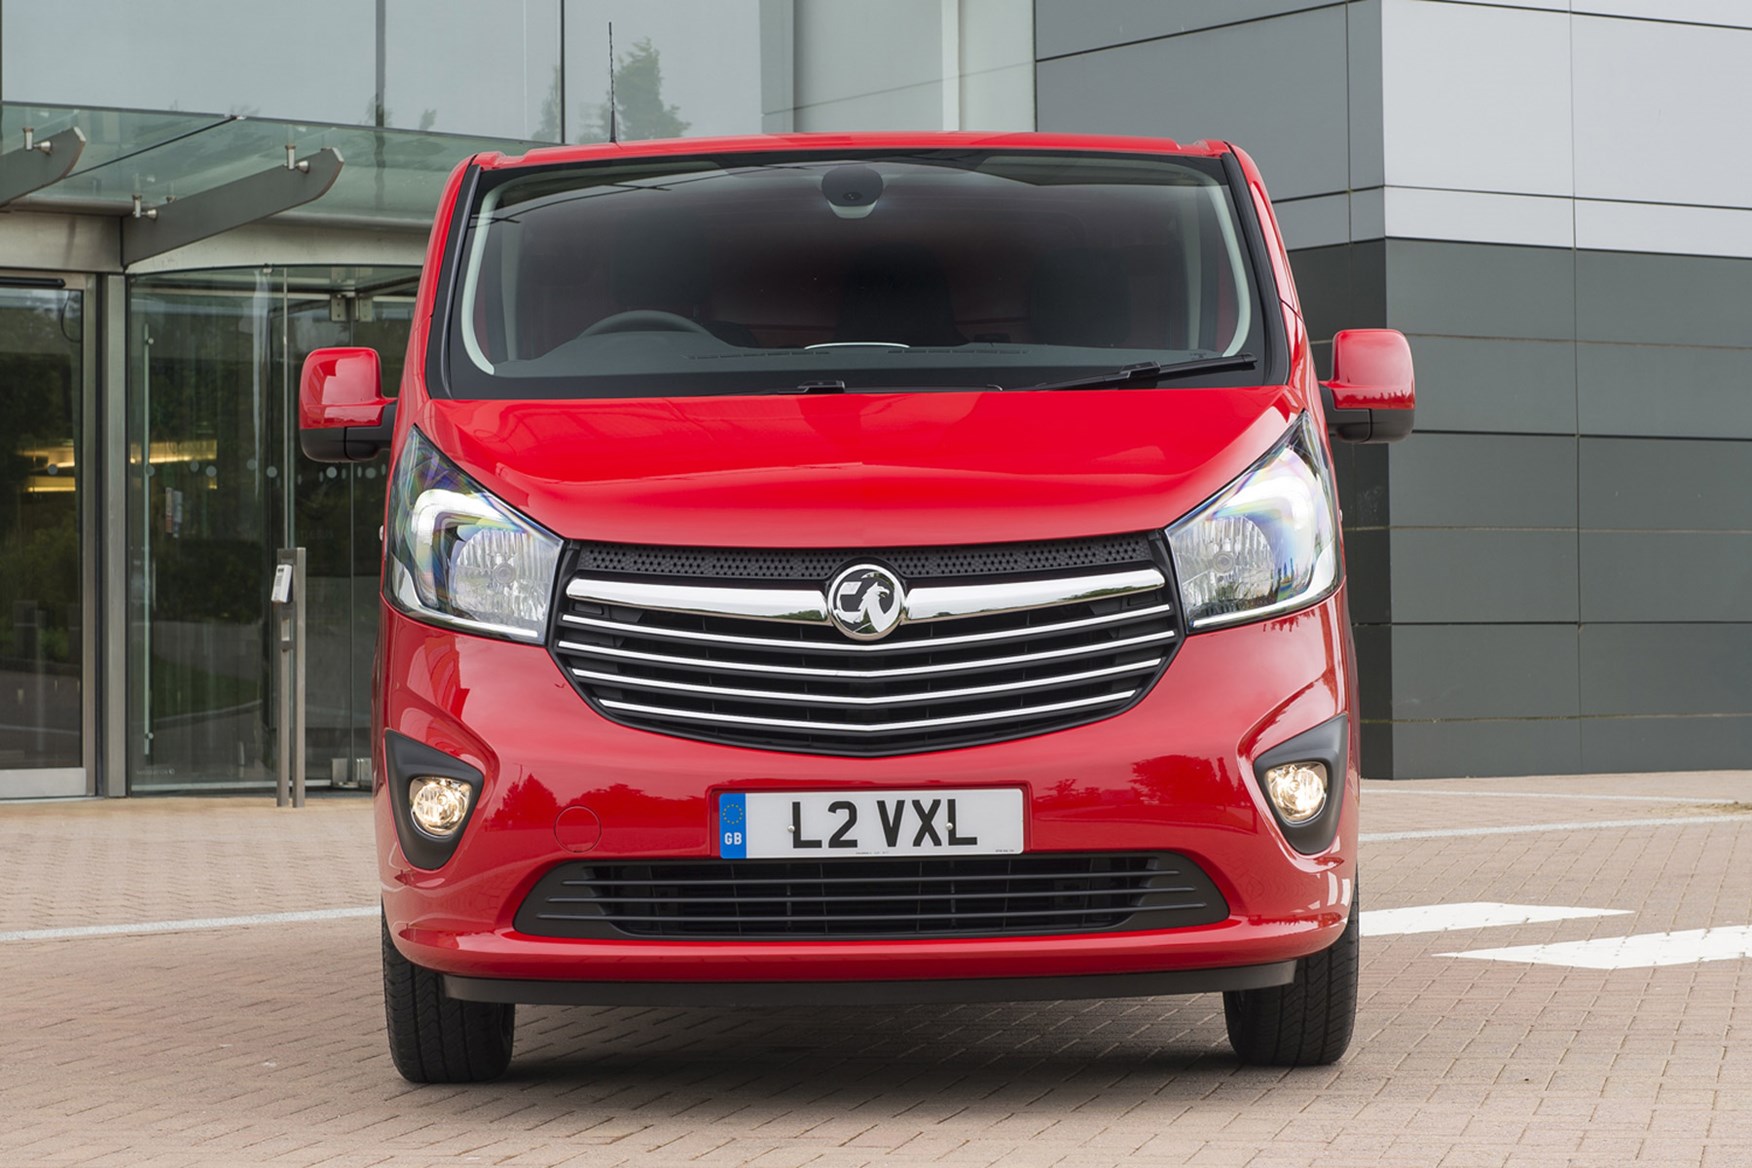 Vauxhall Vivaro review - front view, red 